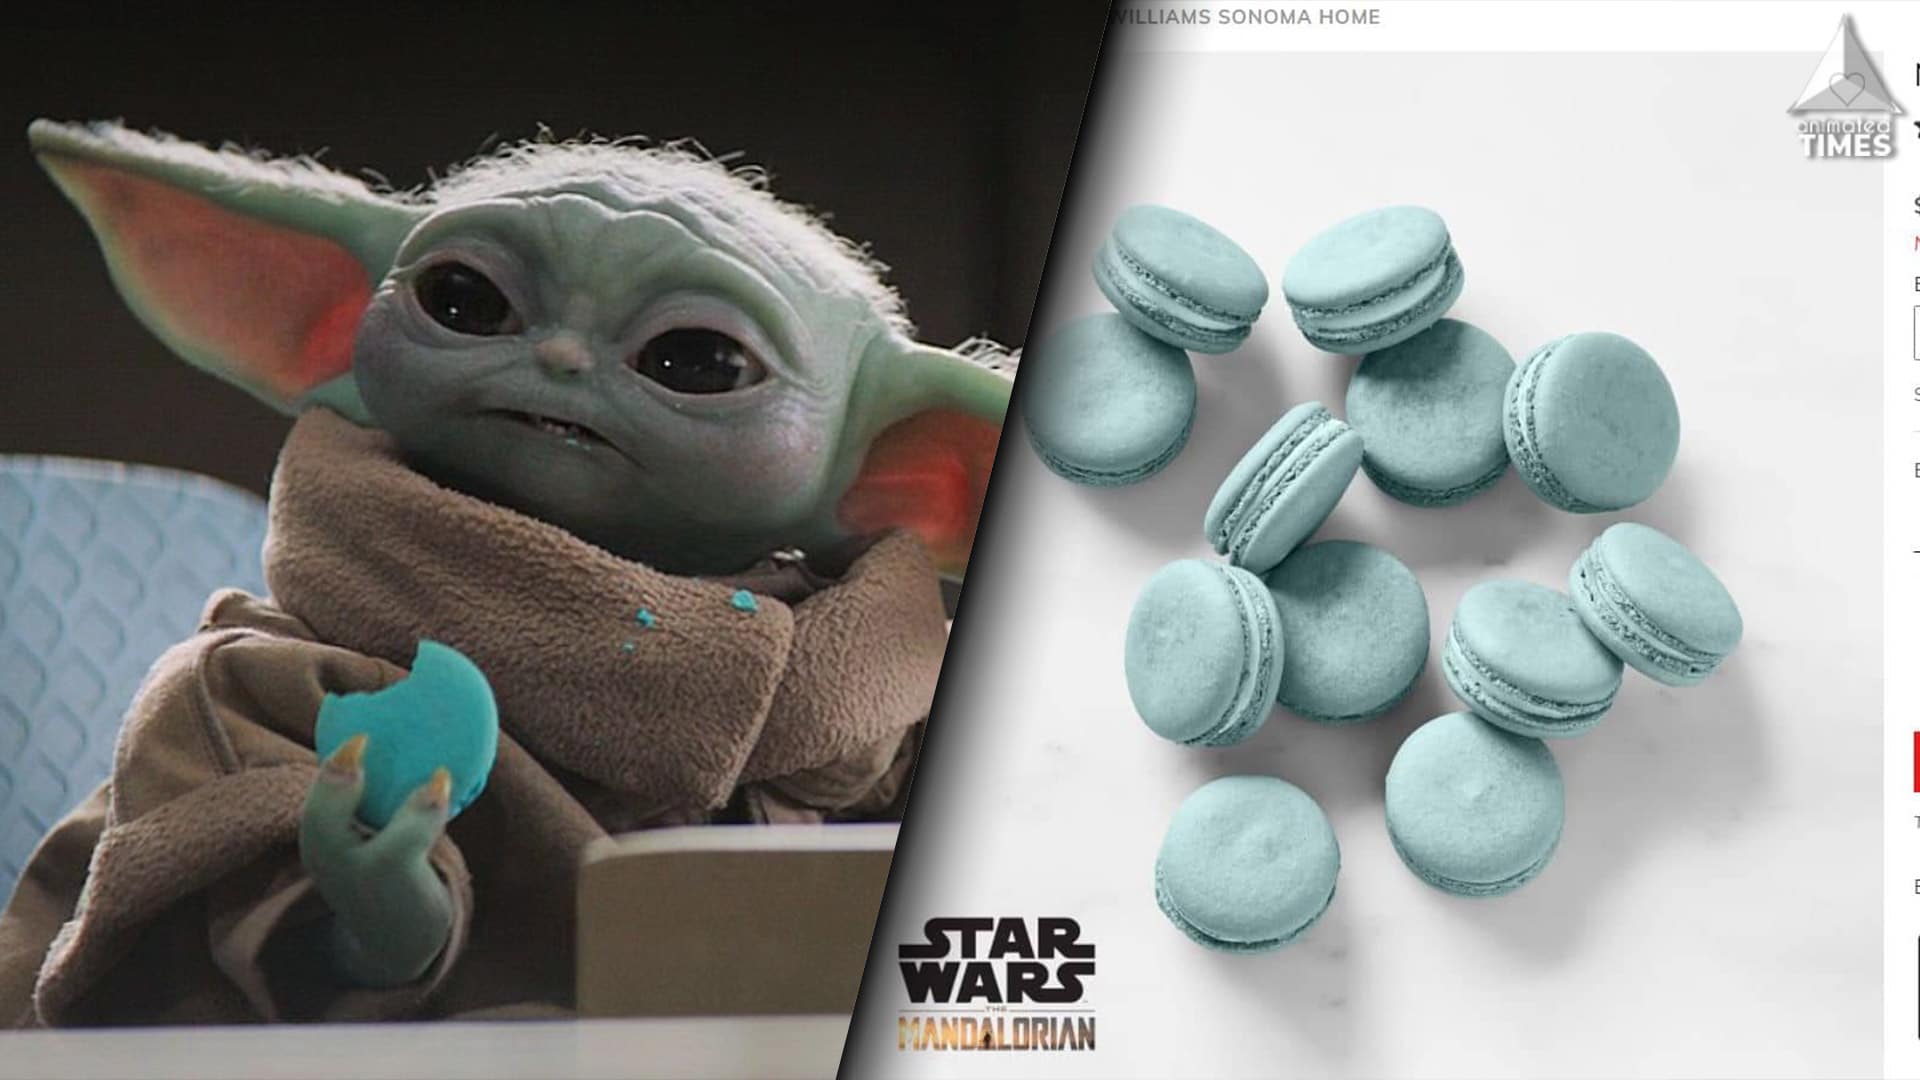 The Mandalorian: Baby Yoda’s Blue Cookies are Available in Real Life